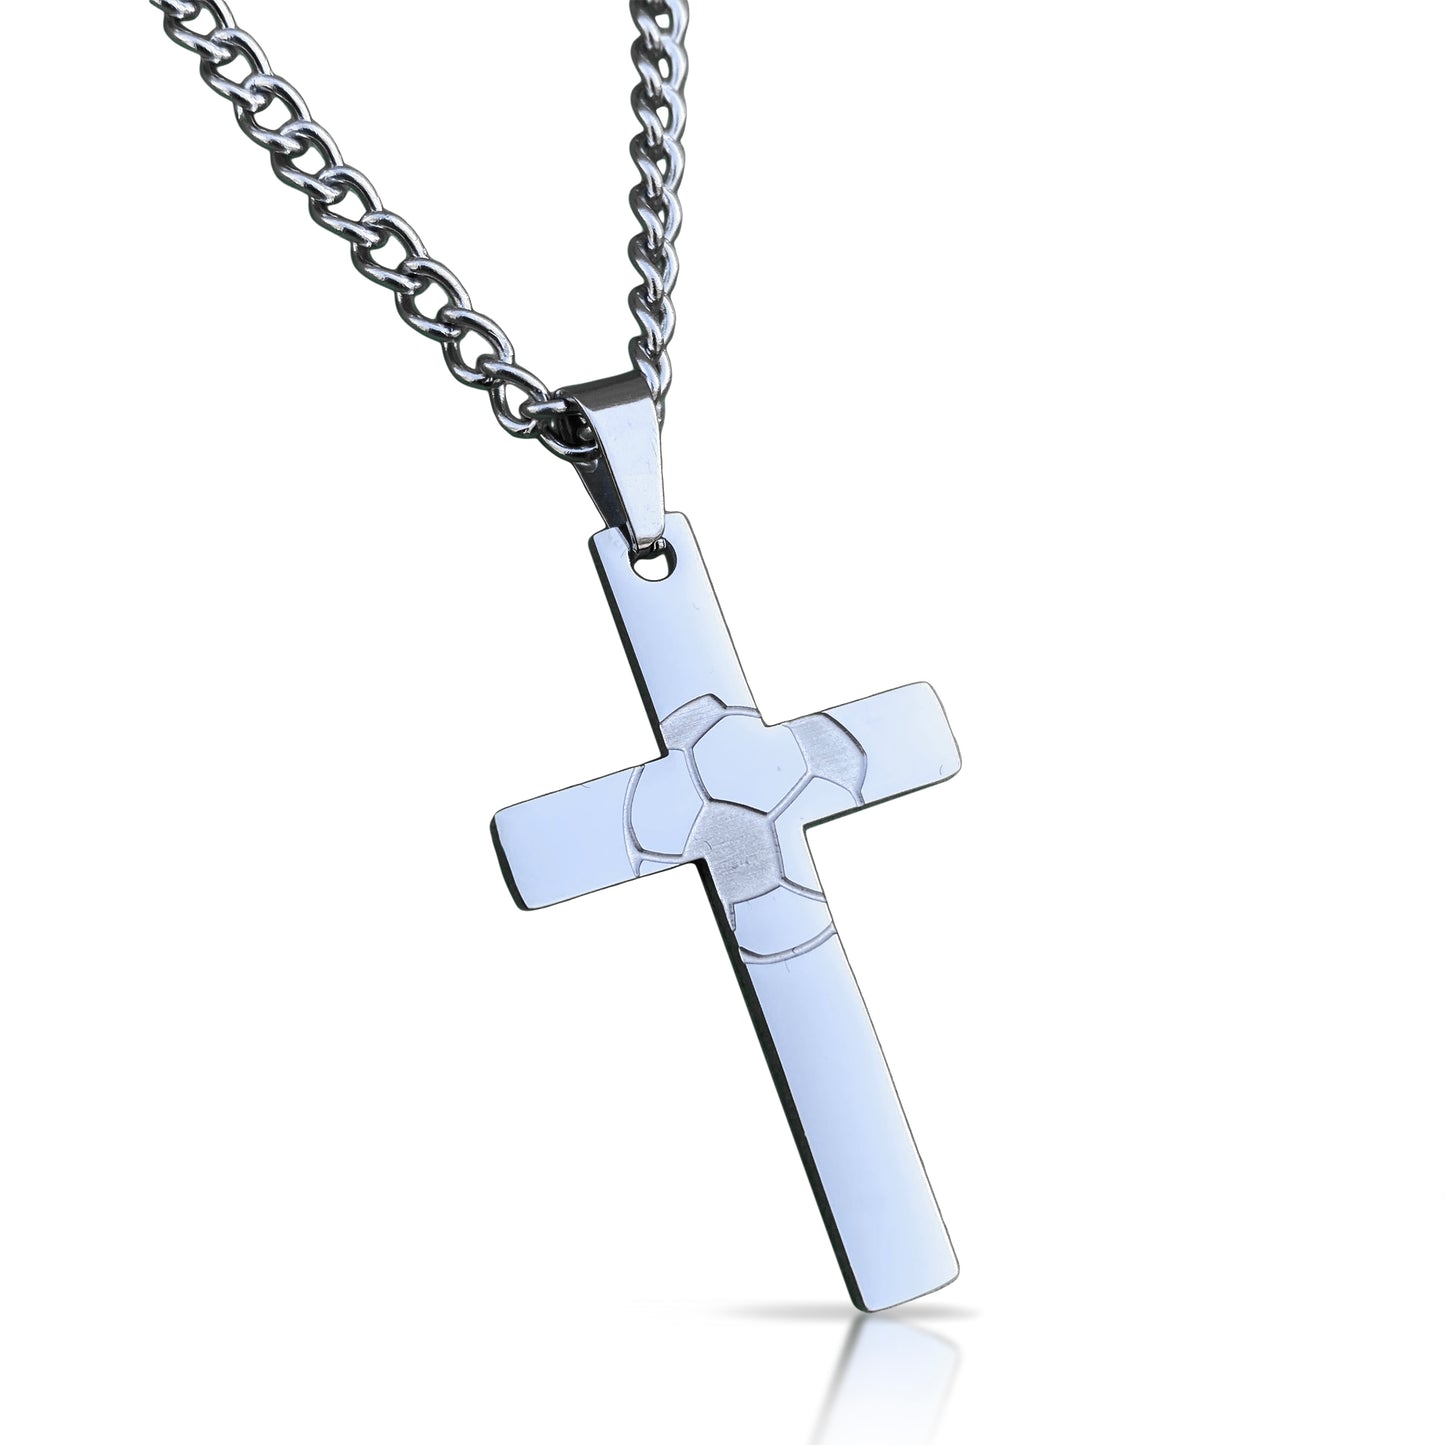 Soccer Cross Pendant With Chain Necklace - Stainless Steel